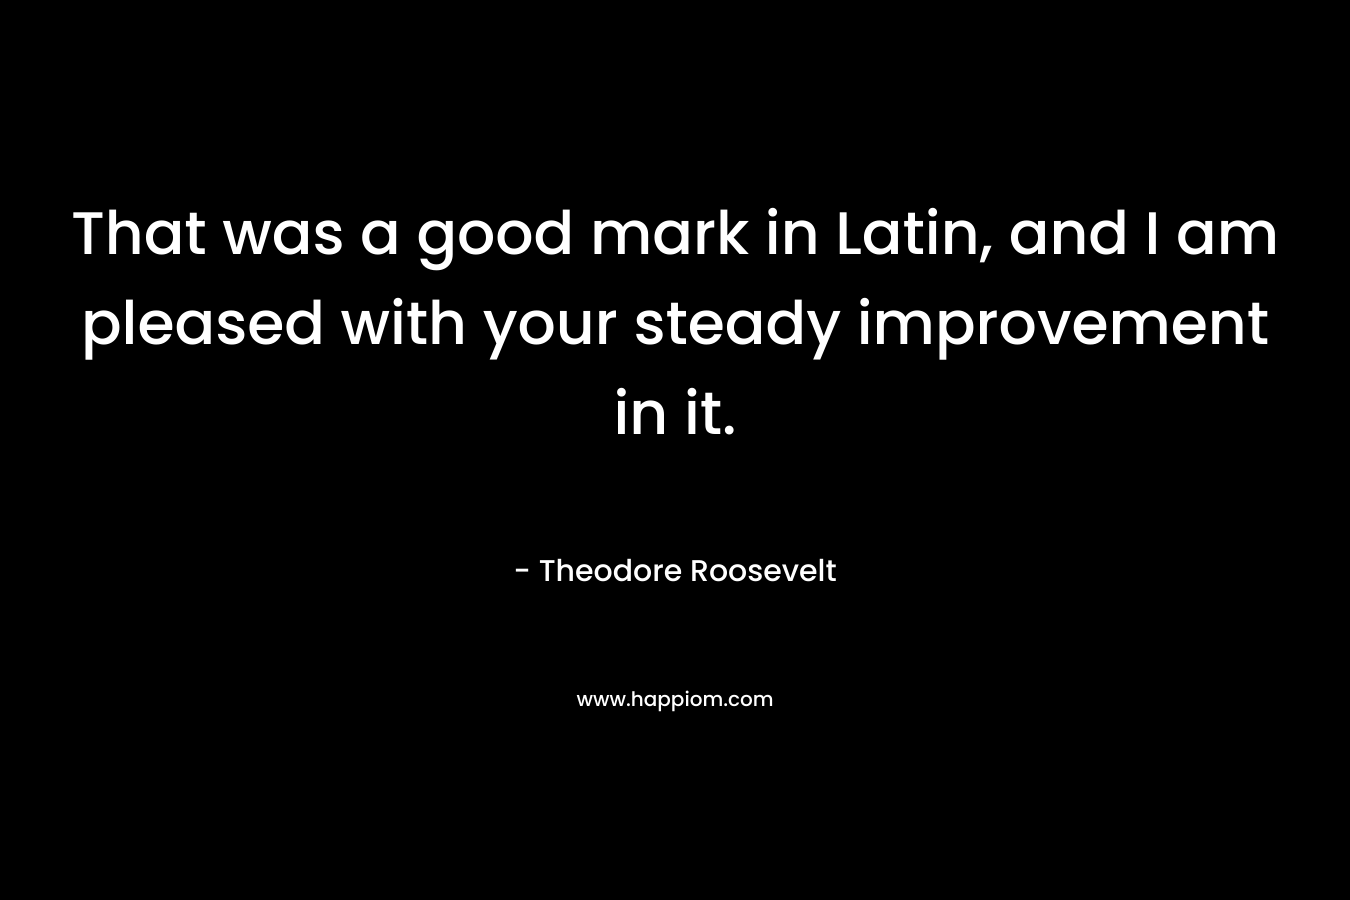 That was a good mark in Latin, and I am pleased with your steady improvement in it. – Theodore Roosevelt